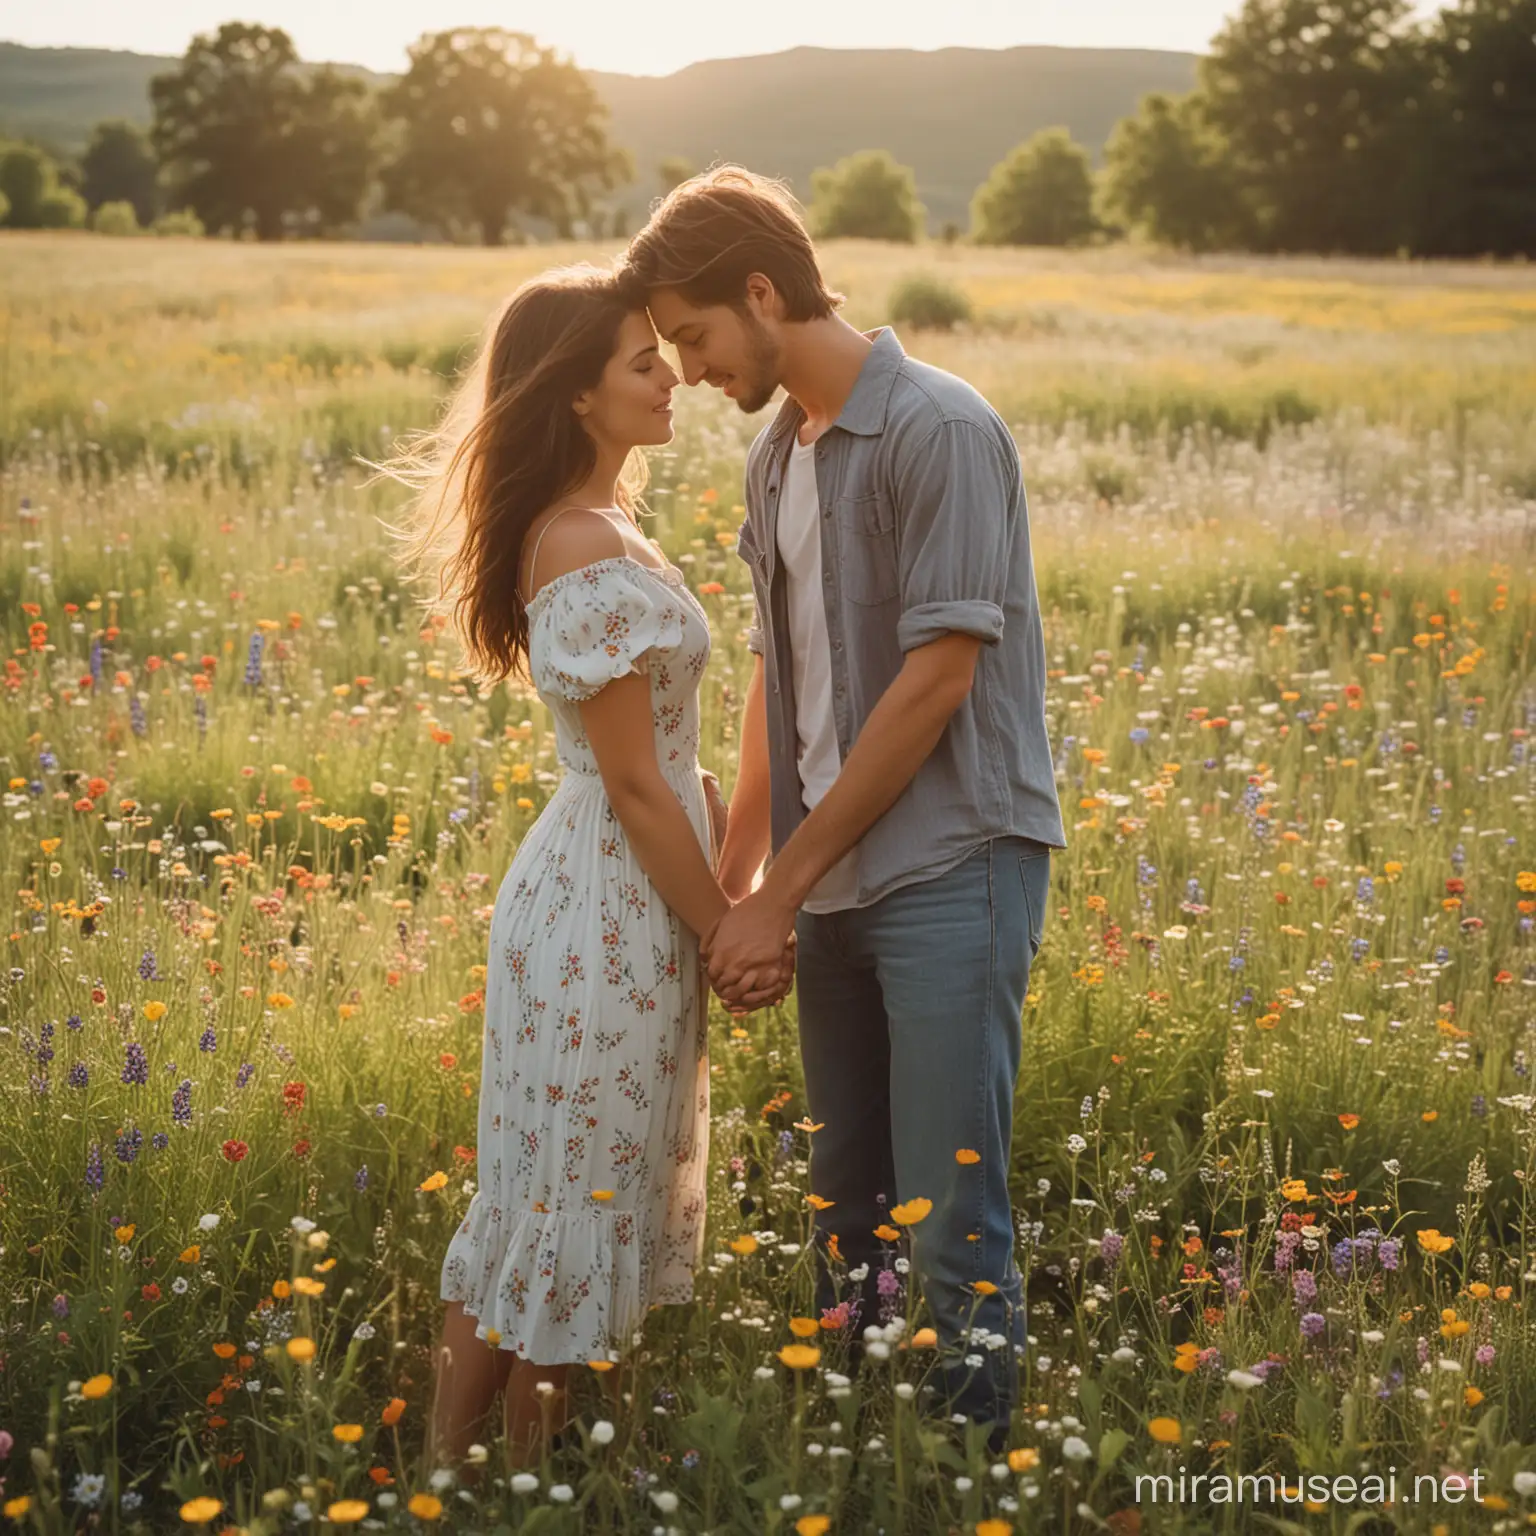 A young couple standing amidst a field of wildflowers, embracing the beauty of nature. Serene, Youthful, Nature, Love, Wildflowers. DSLR. 35mm. Morning. Natural, Candid. Color Slide. Aperture Priority. Soft focus, Warm tones.